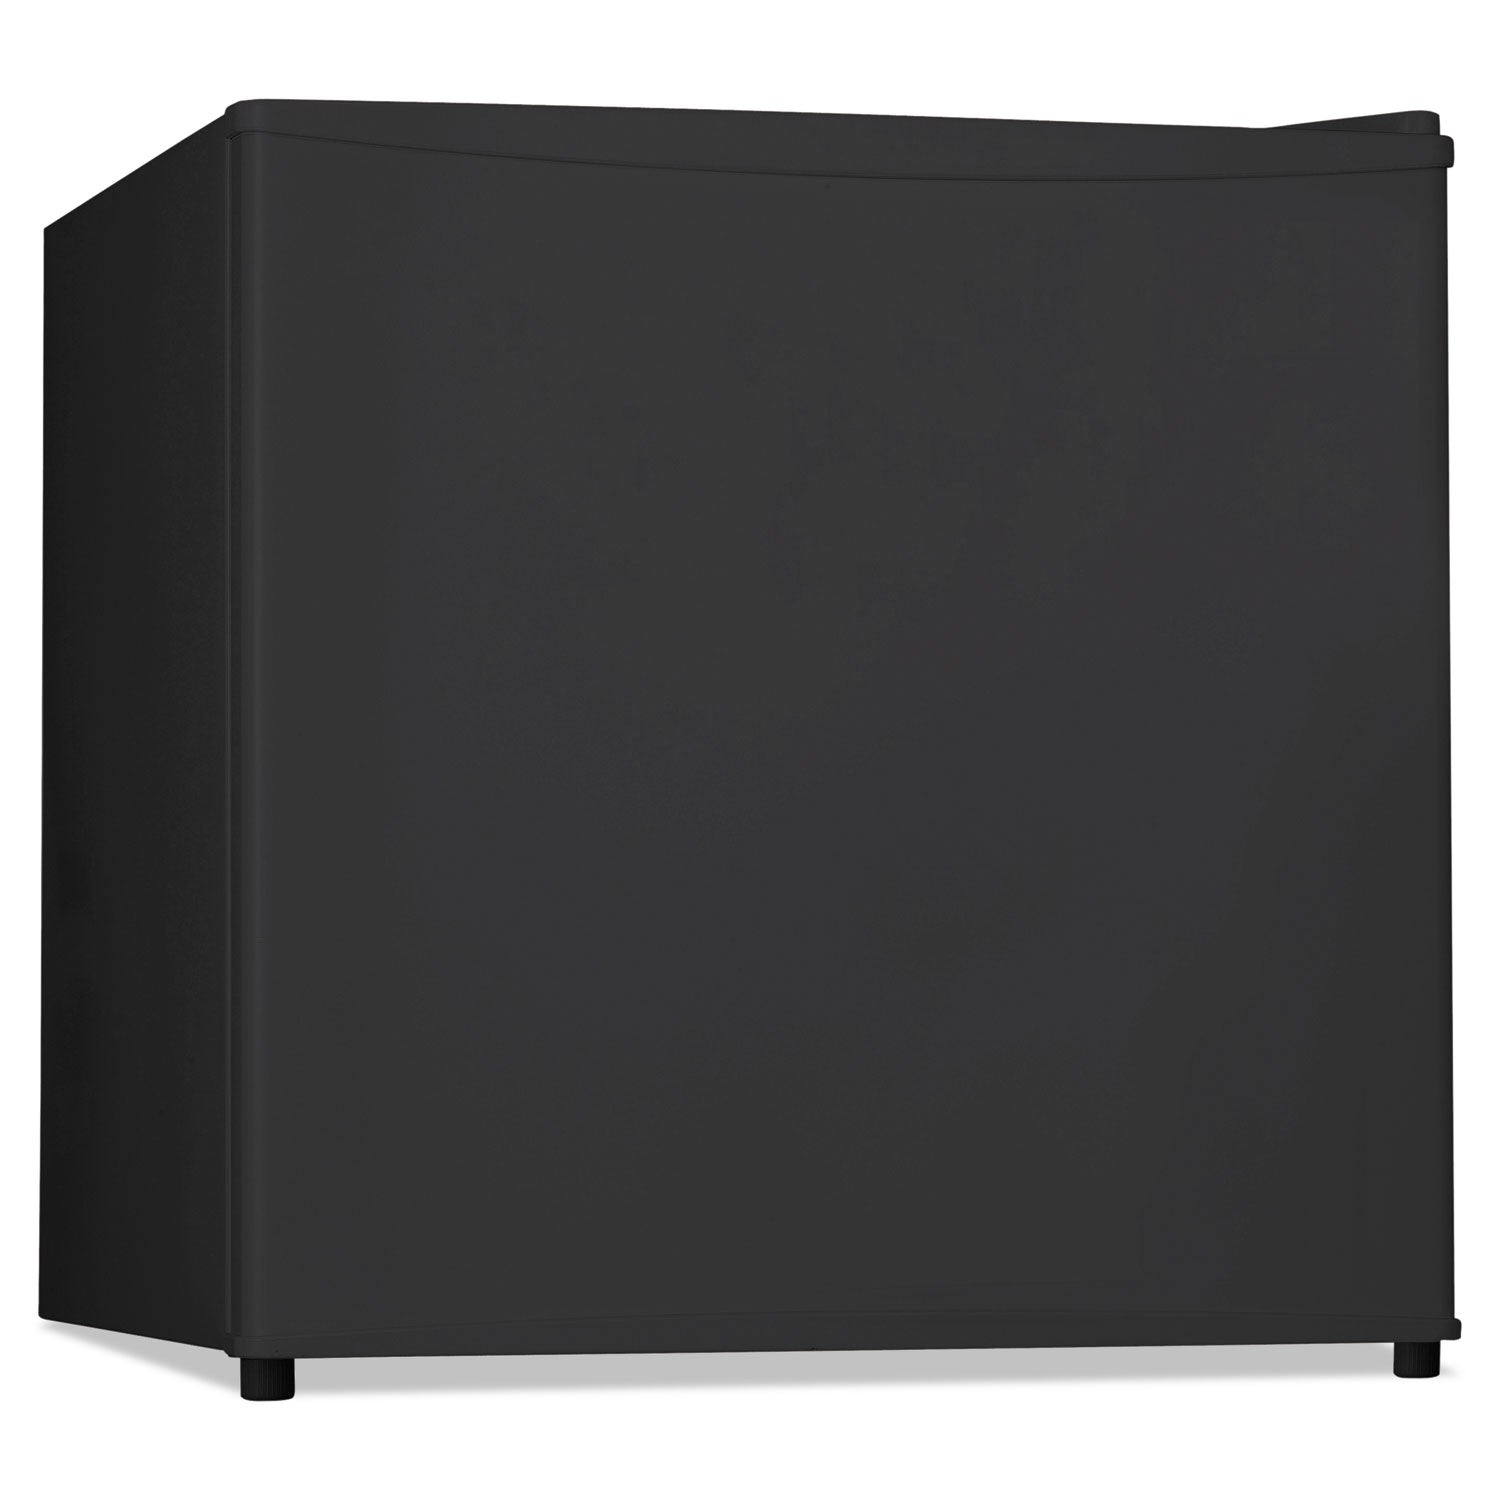 16-cu-ft-refrigerator-with-chiller-compartment-black_alerf616b - 2